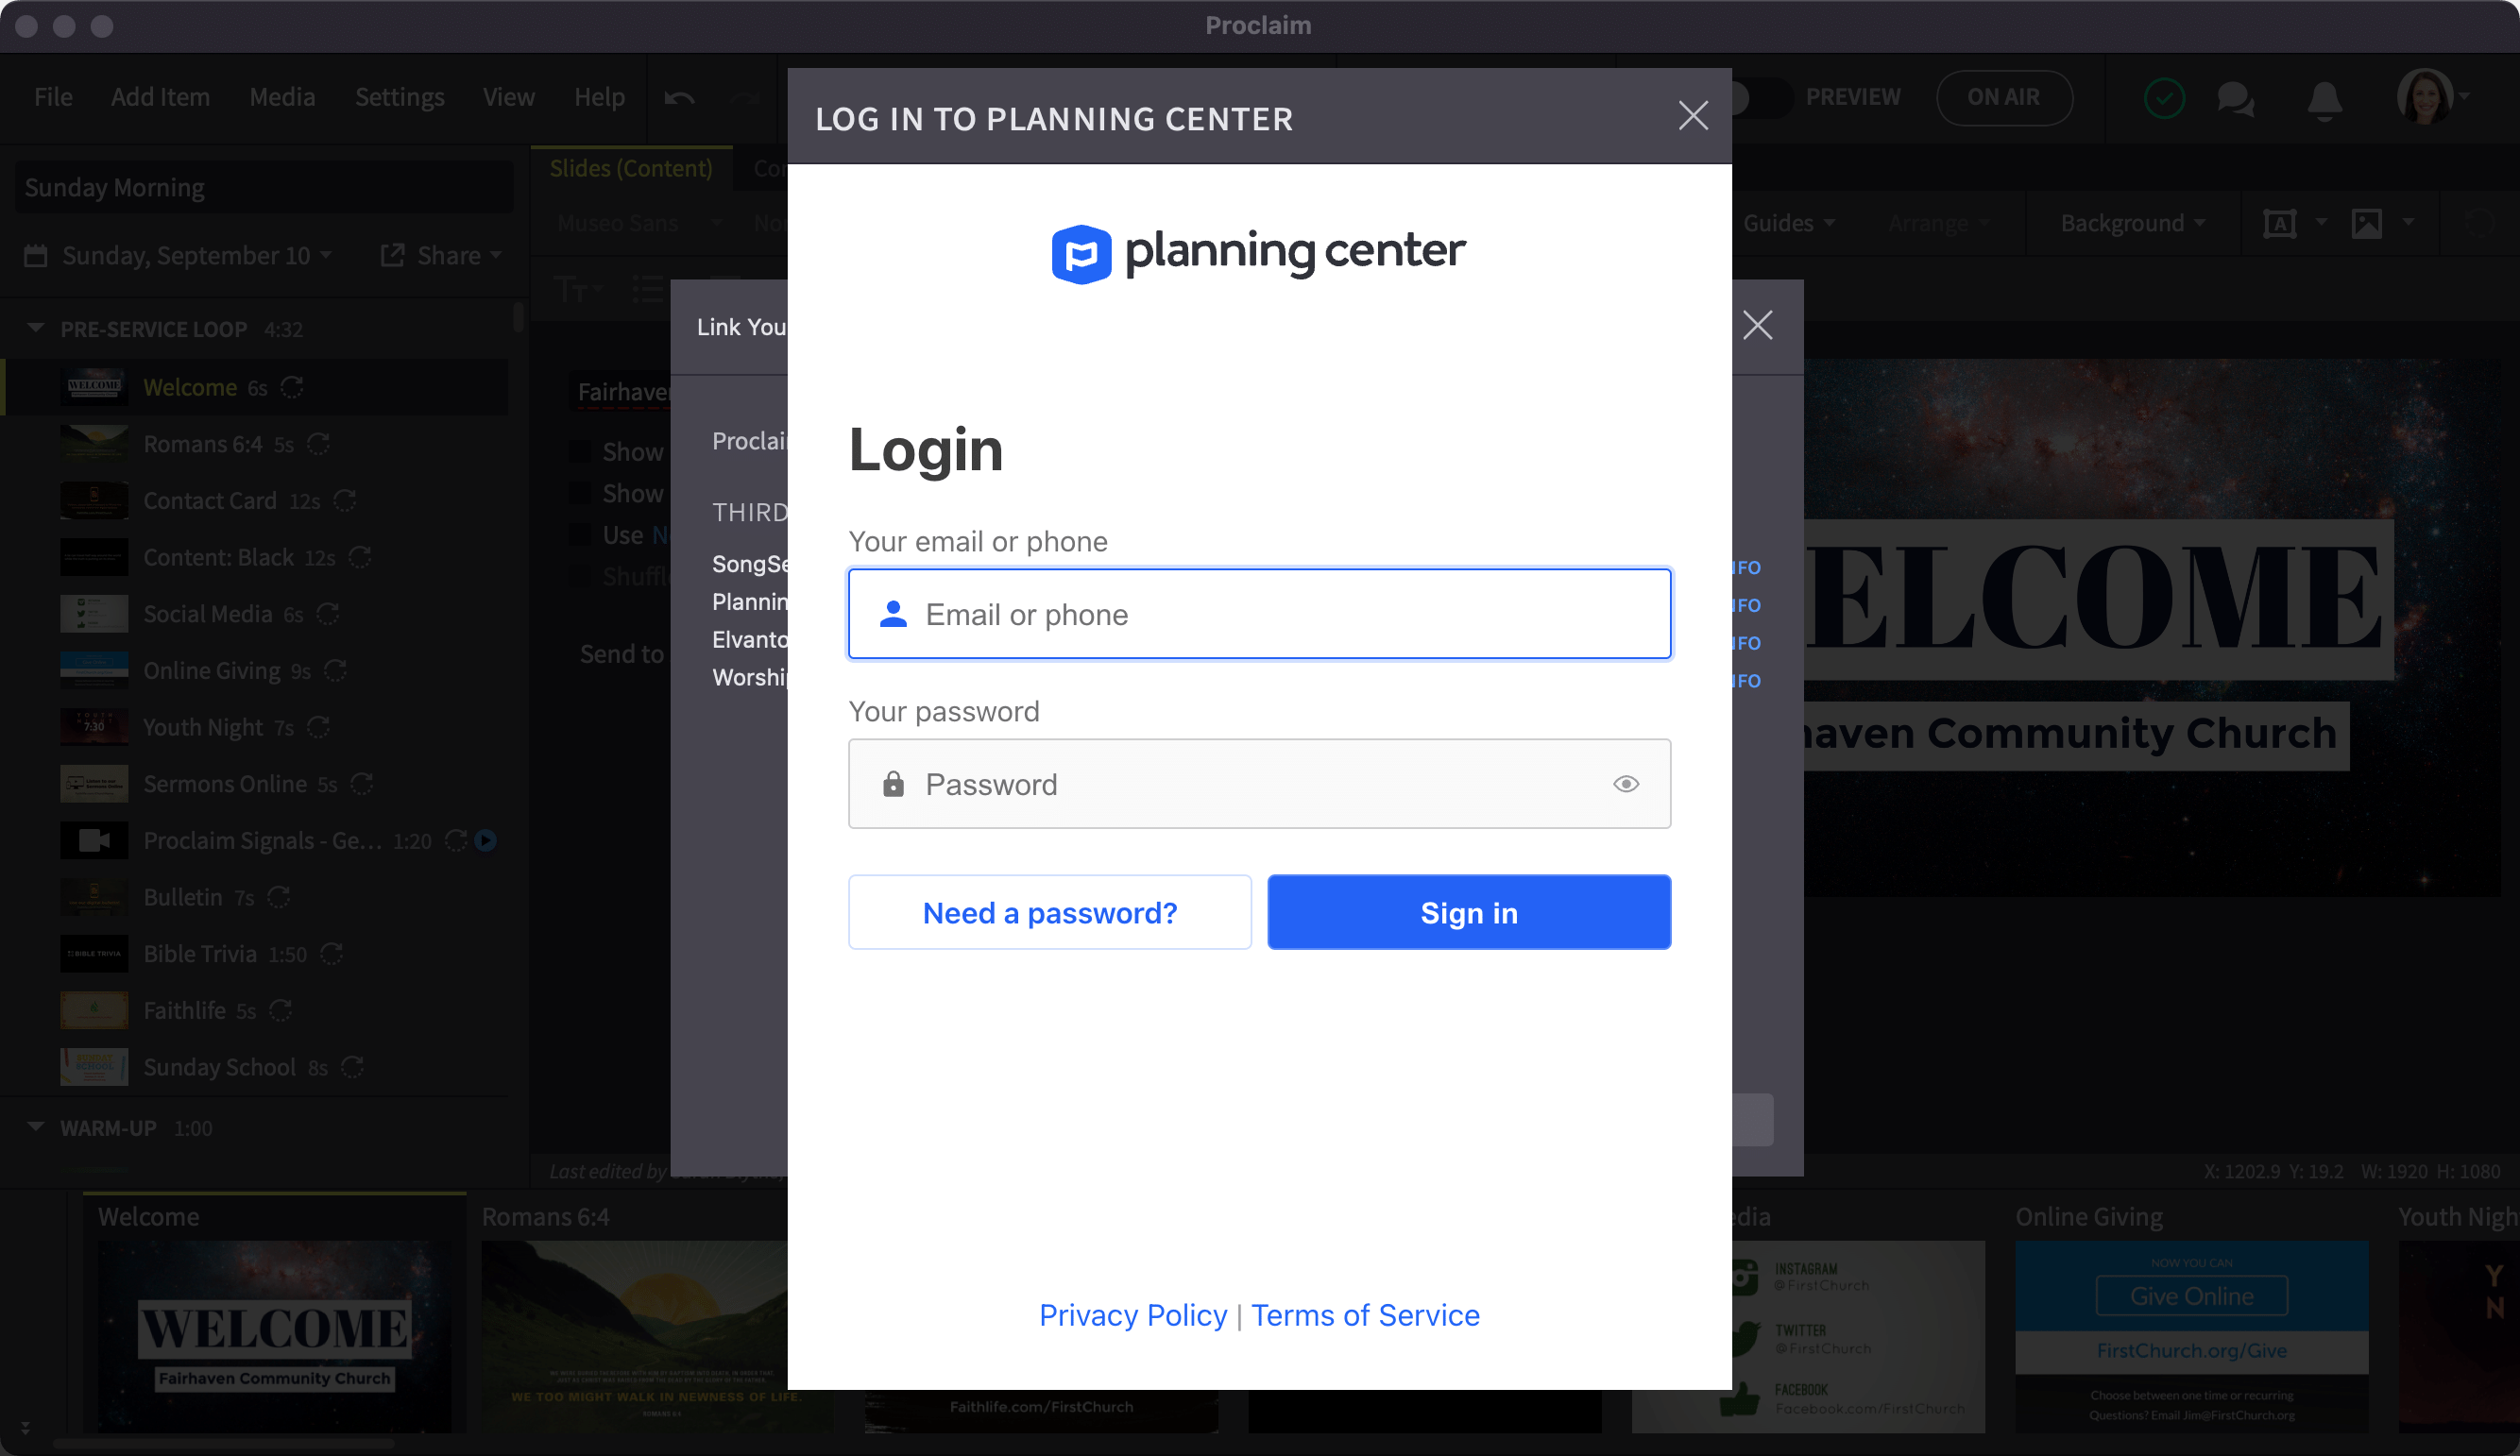 Proclaim with Planning Center Online popup visible showing username and password fields